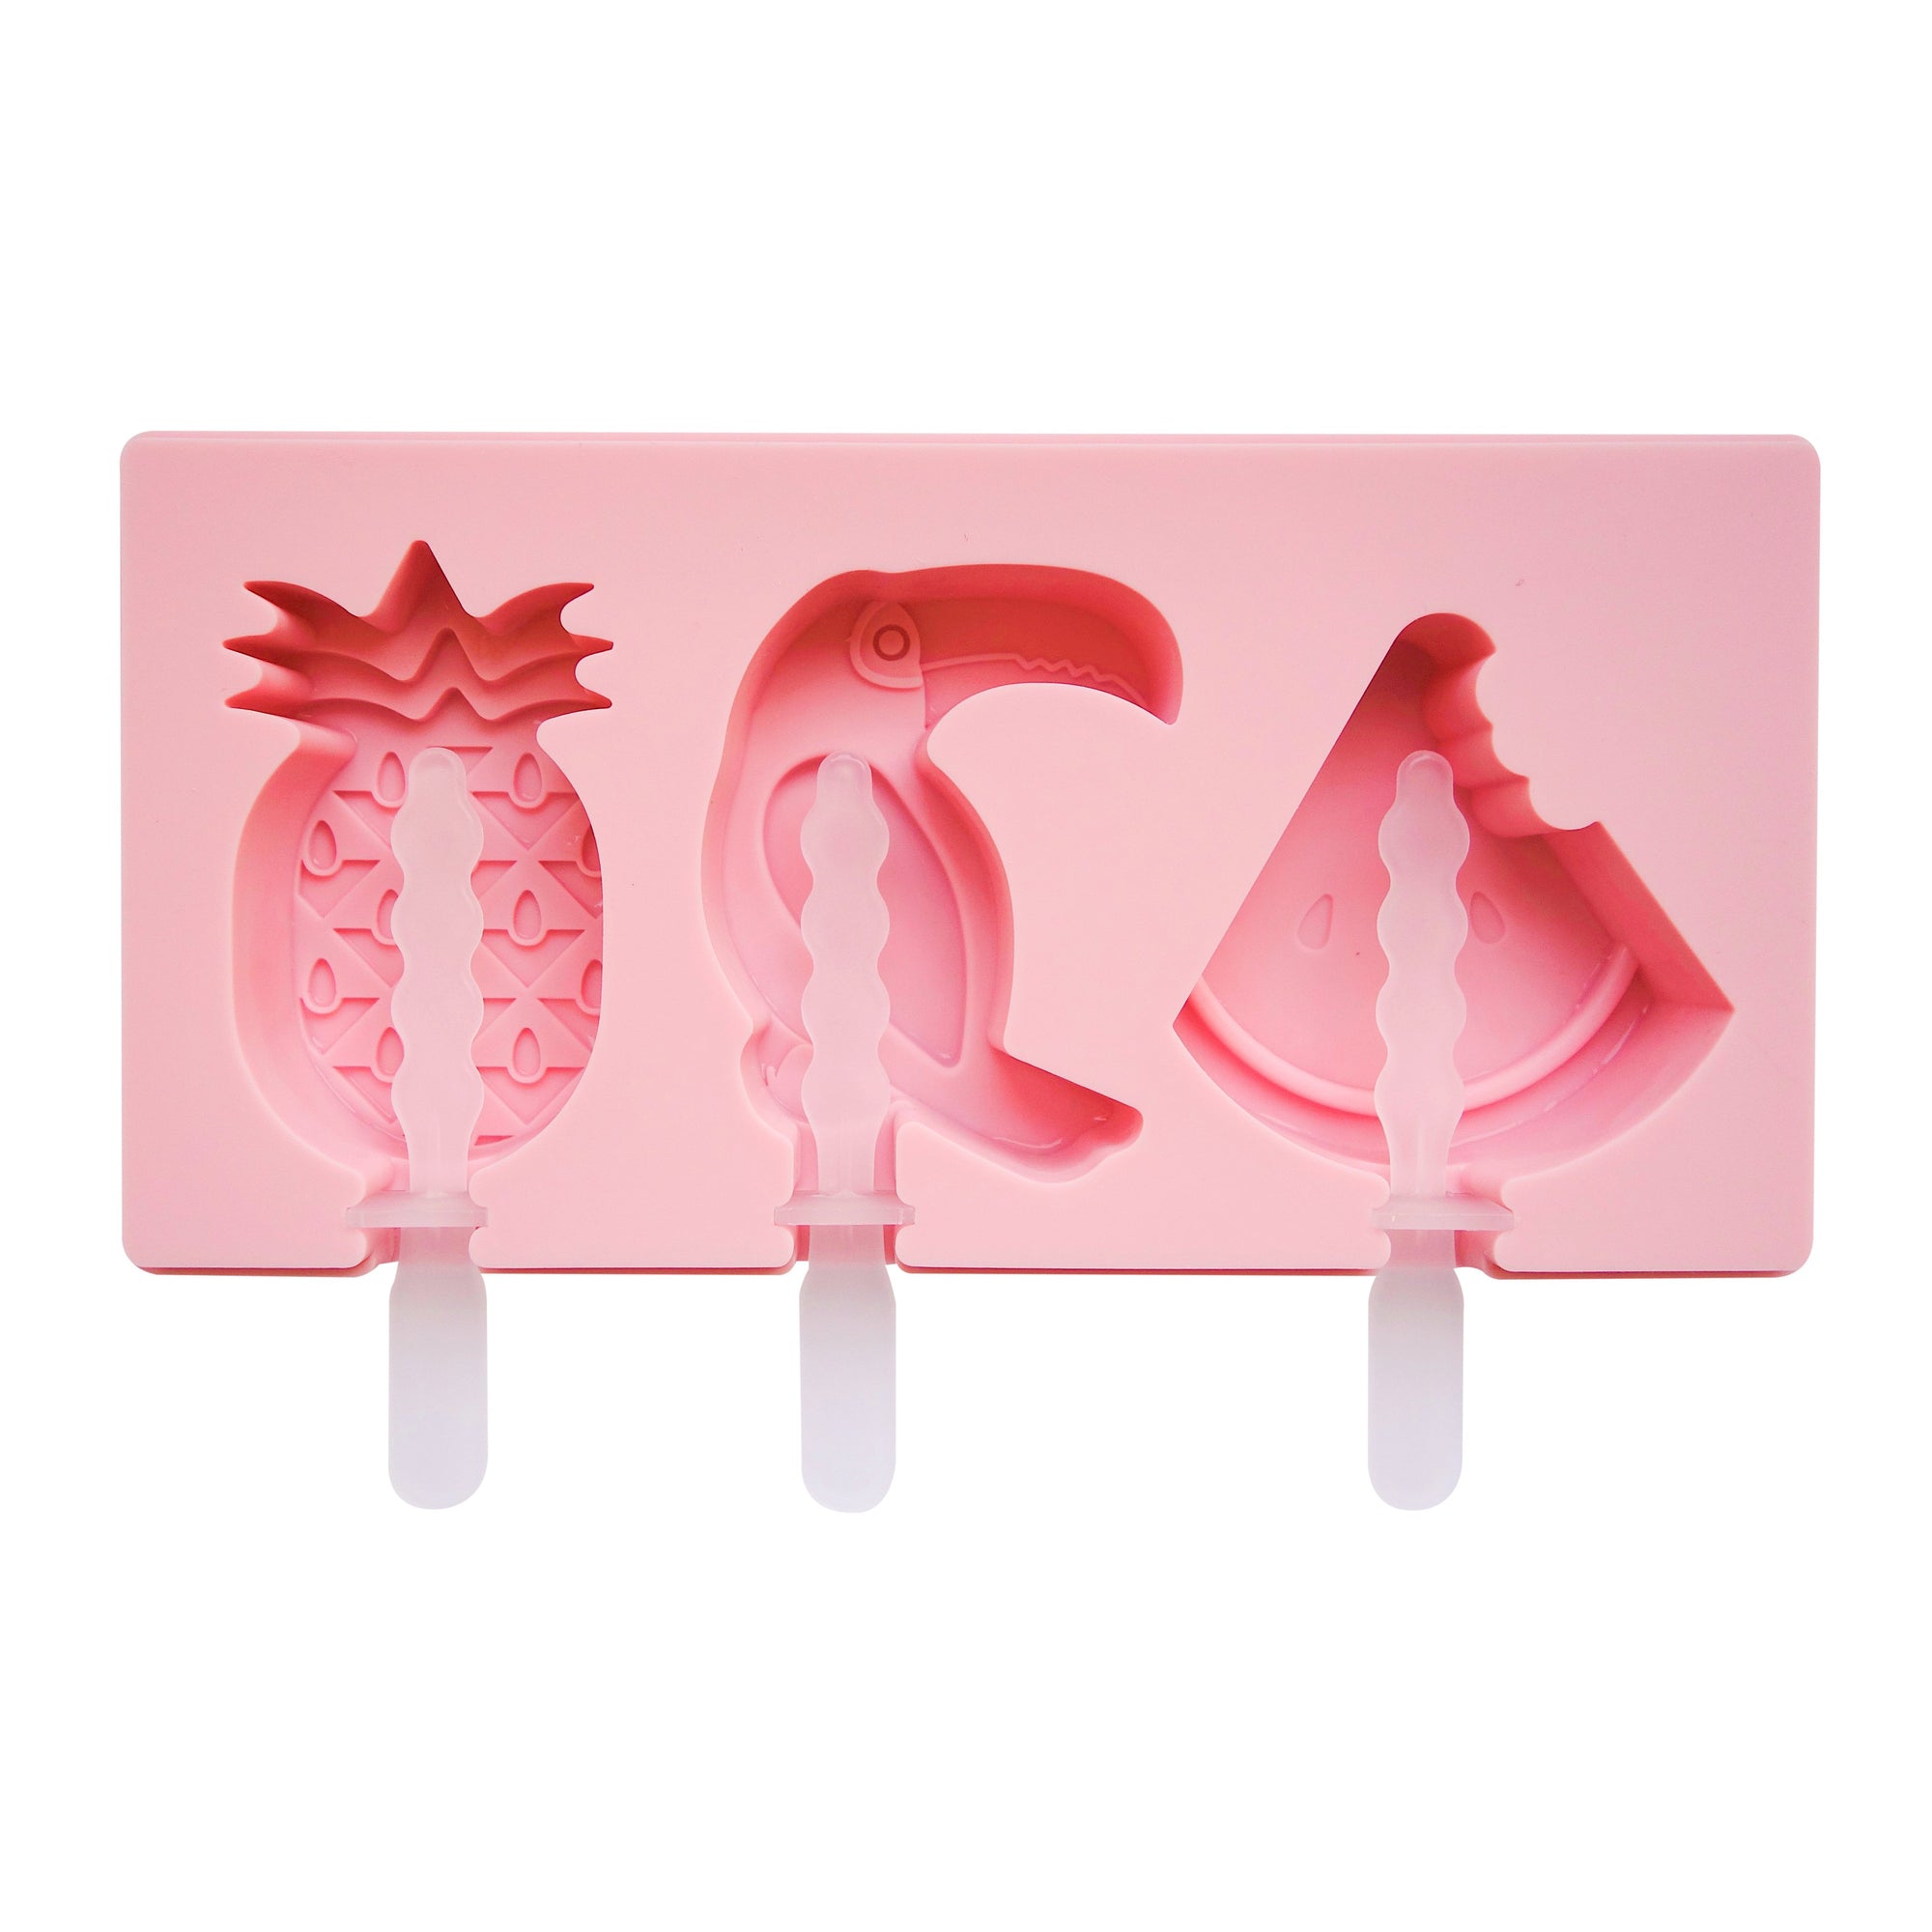 tropical pineapple toucan watermelon popsicle mold yummy gummy molds